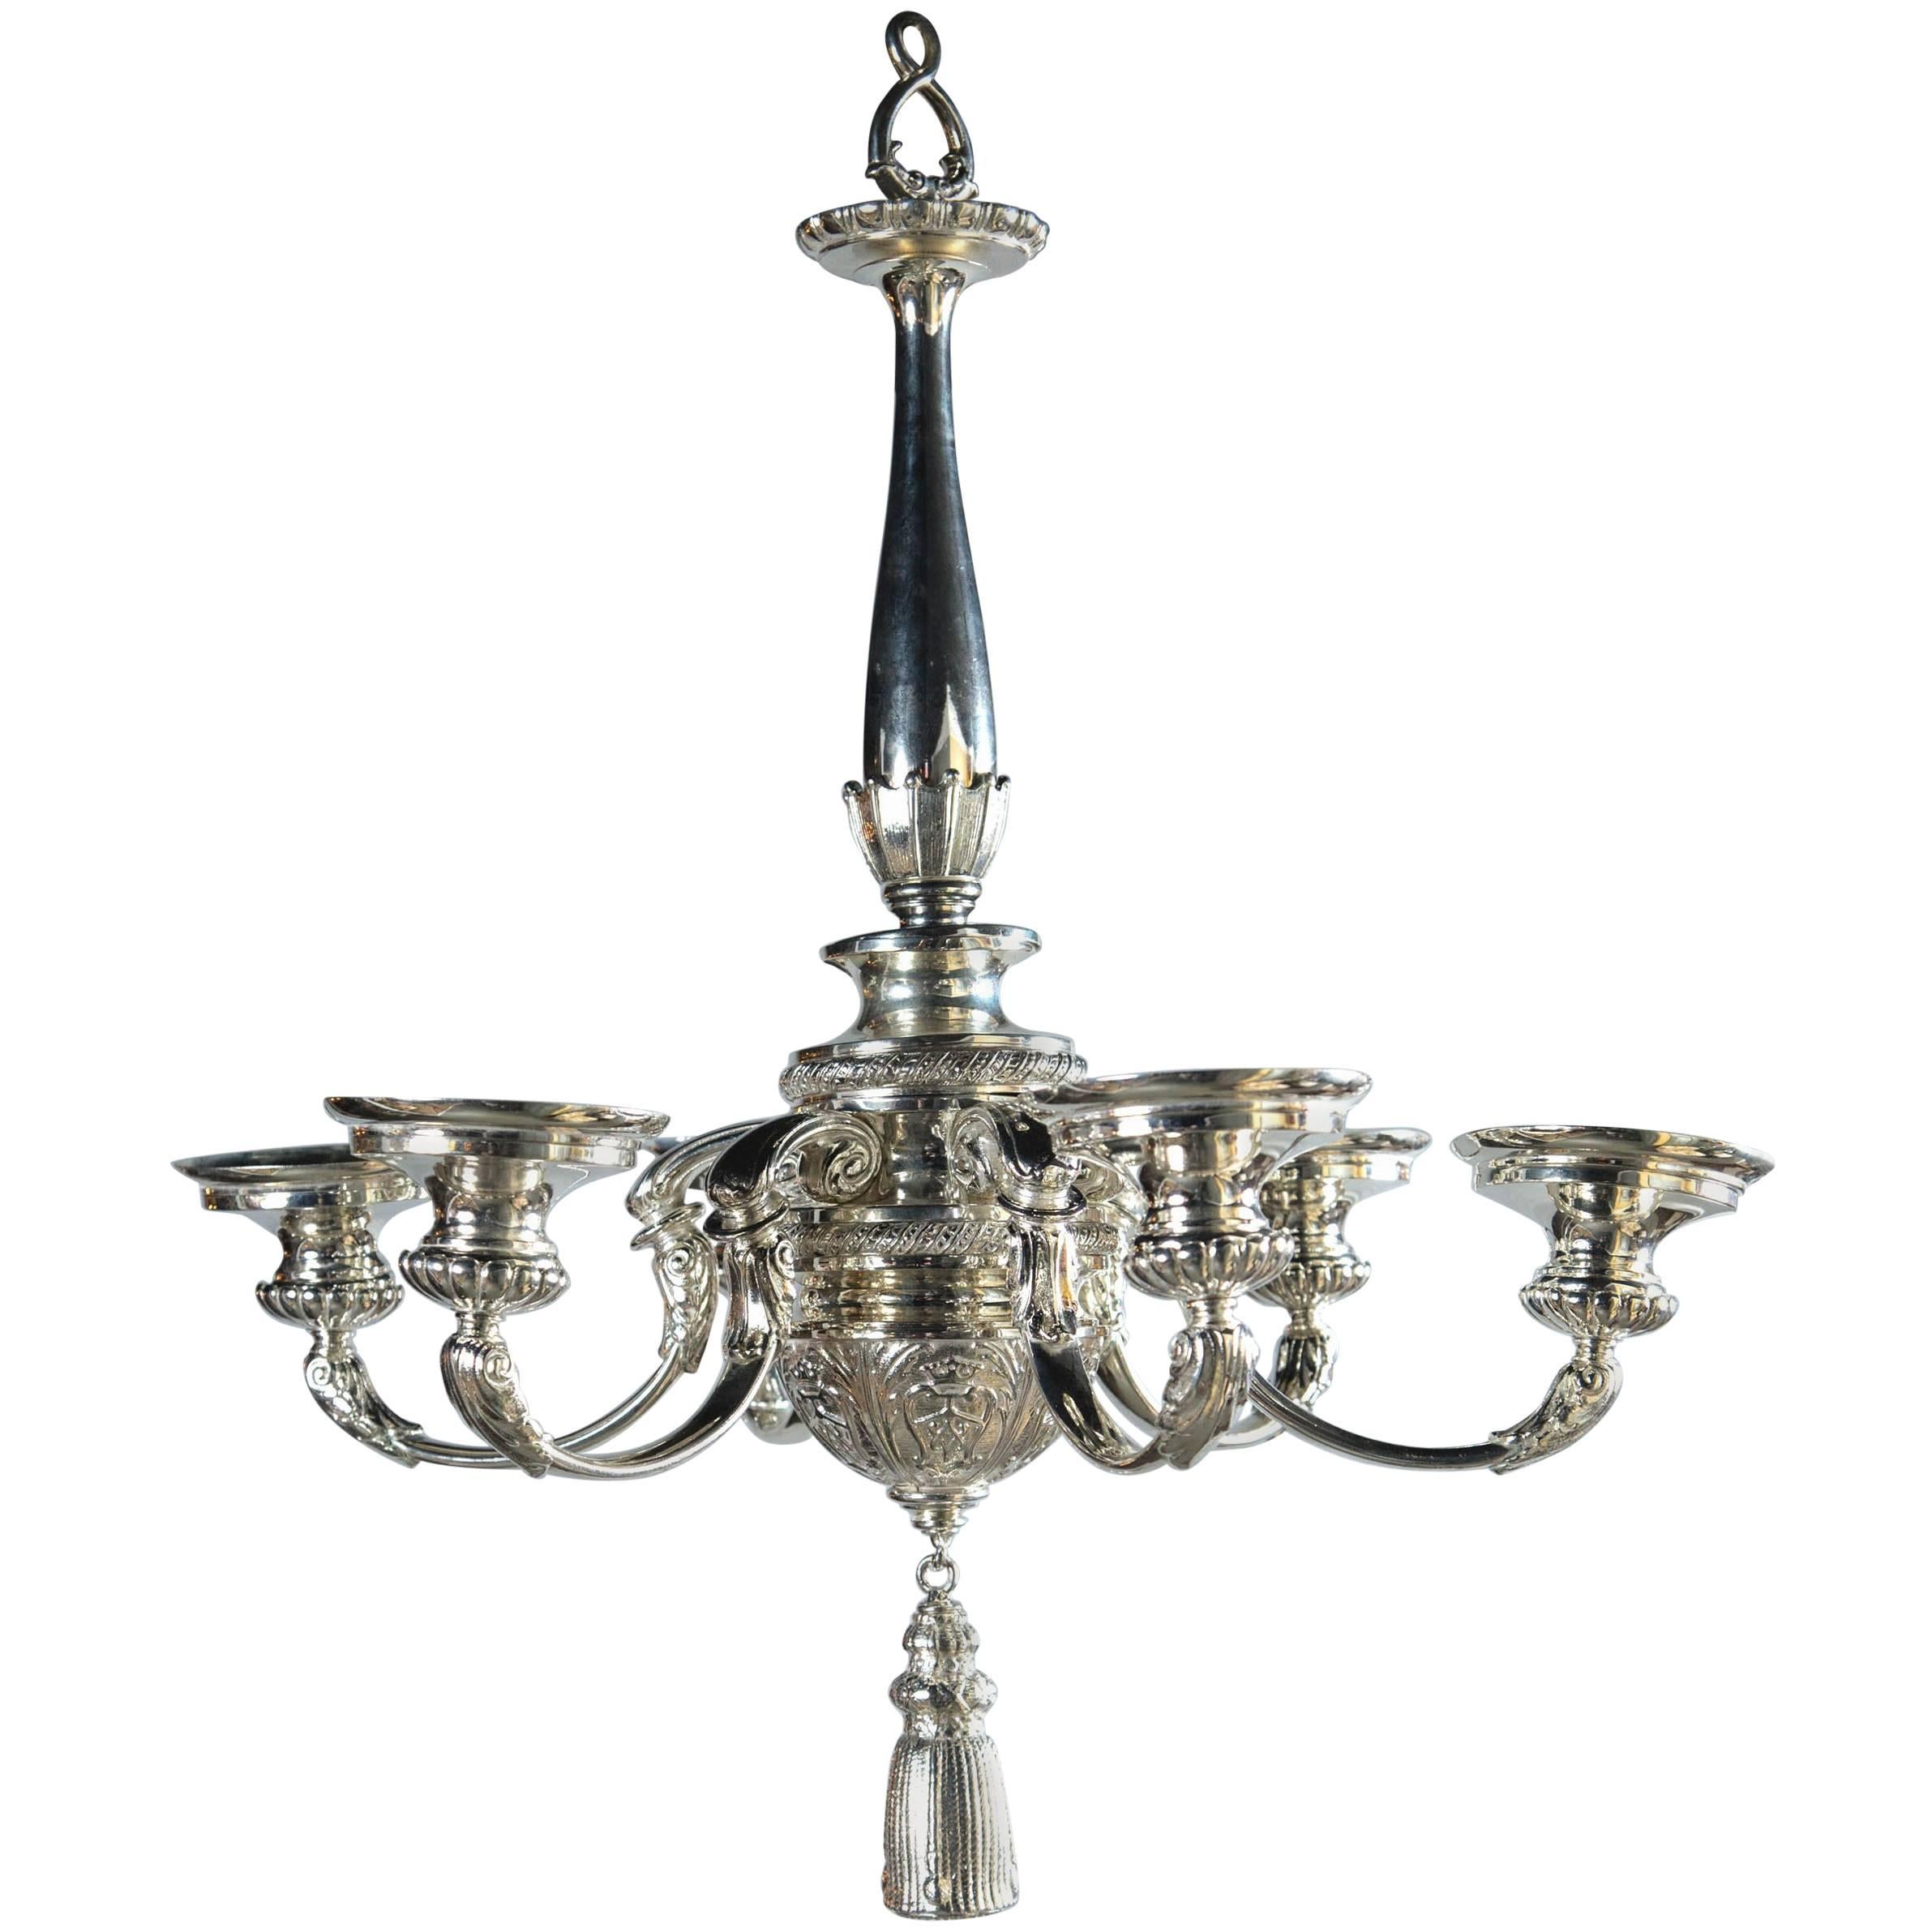 Silver Plated Neoclassic Style Caldwell Chandelier, circa 1930 For Sale